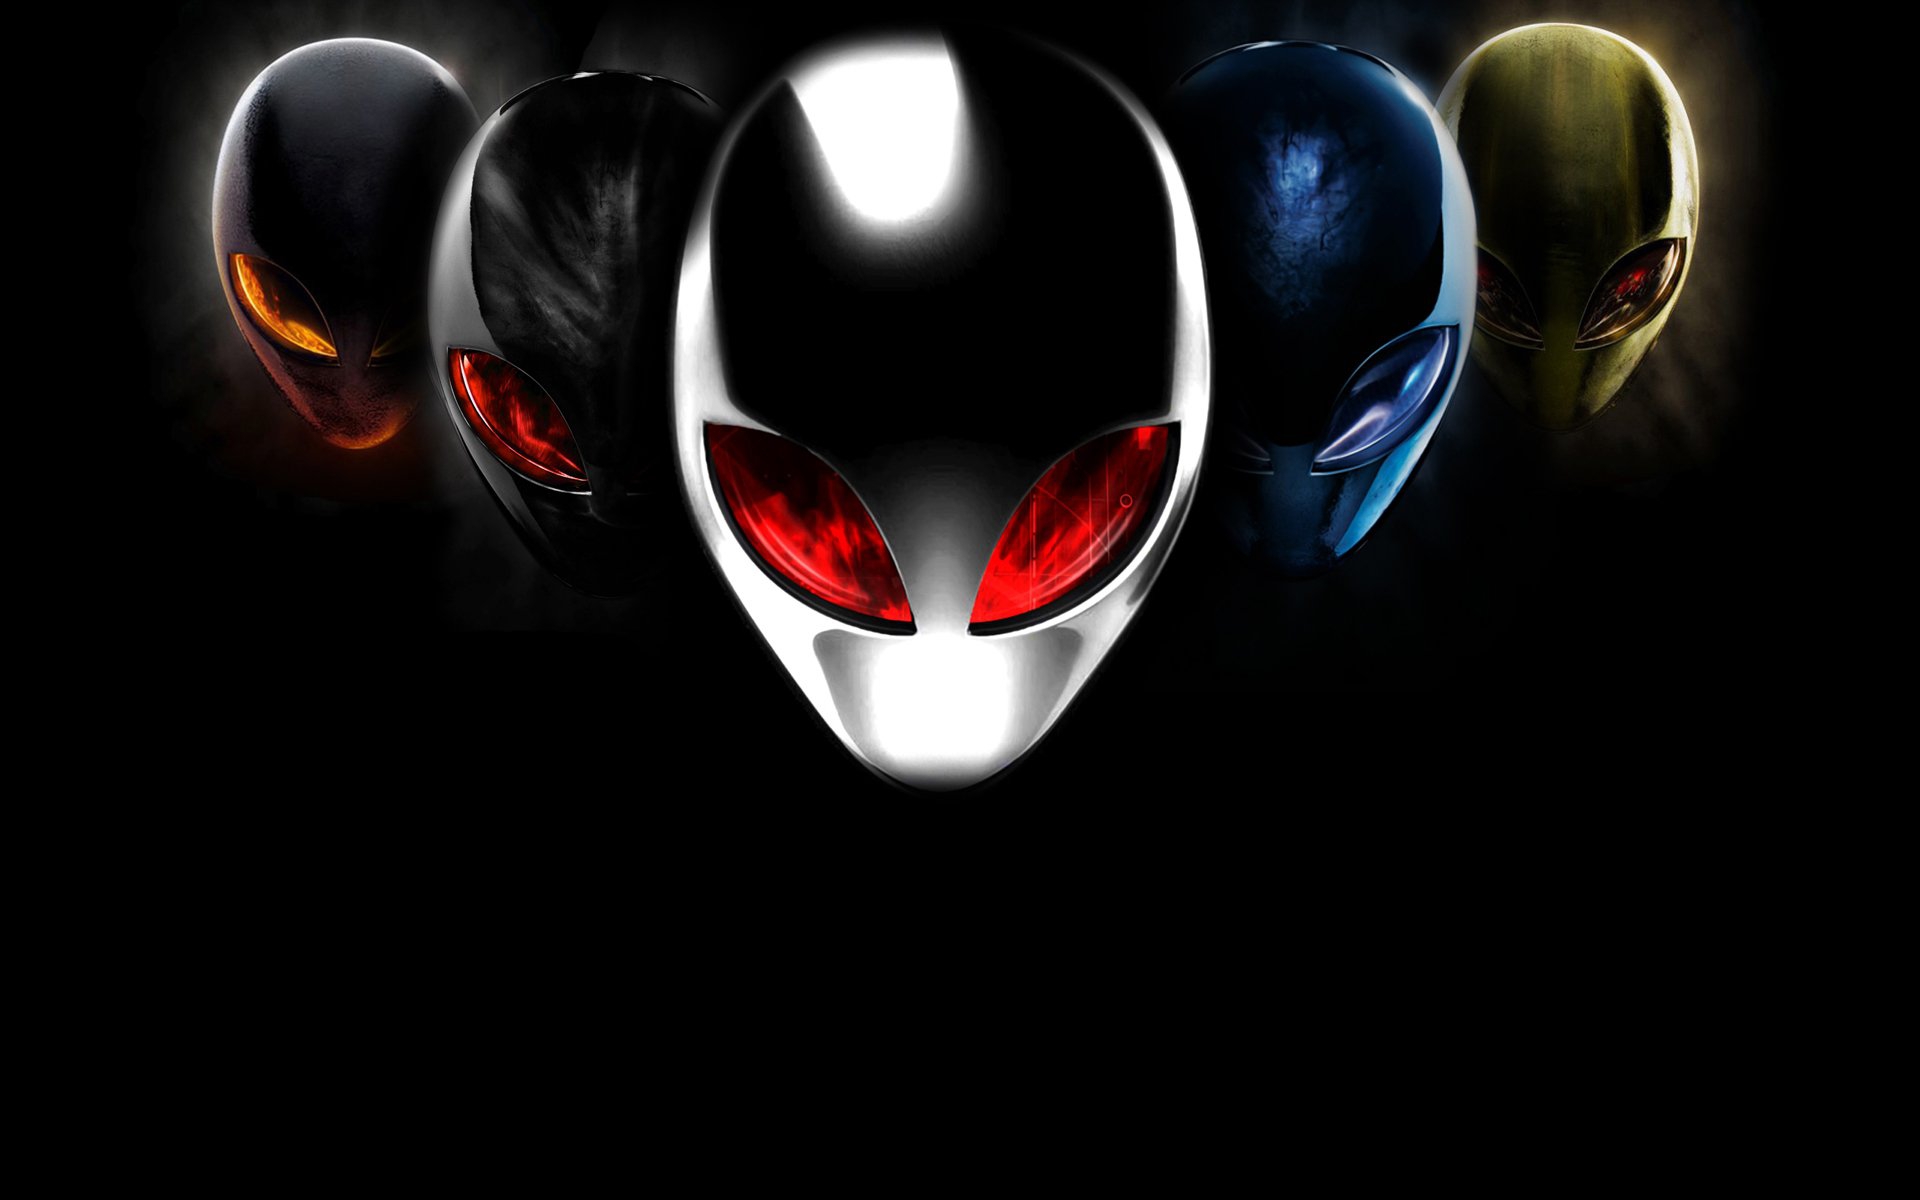 Alienware HD Wallpapers, Pictures, Images